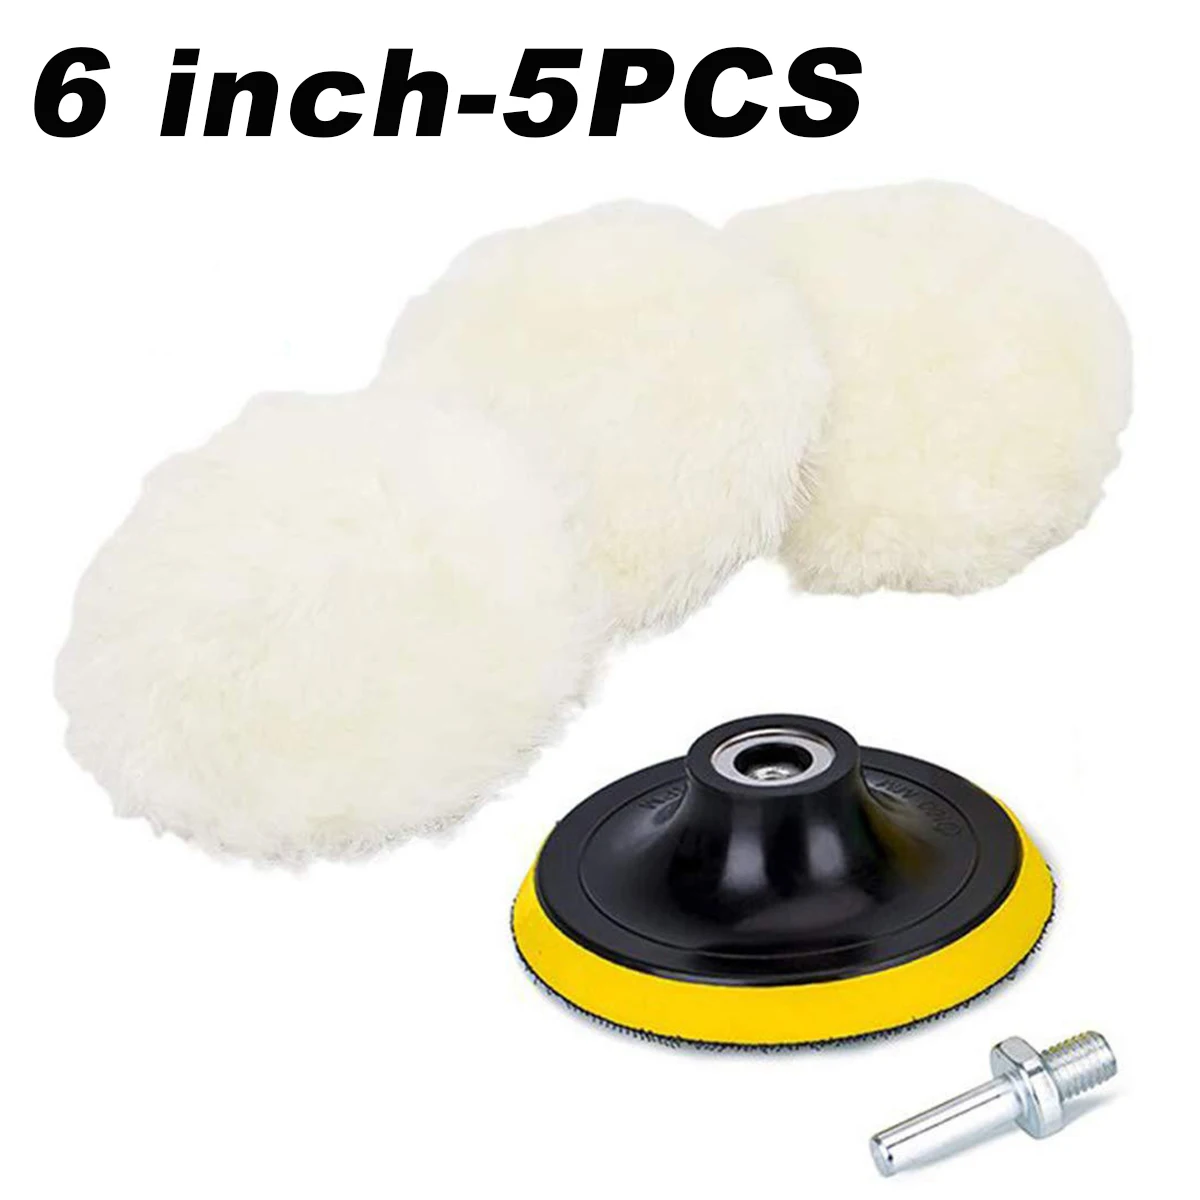 5PCS/Set 7/6/3inch Car Polishing Waxing Buffing Wheel Pad Car Polisher Kit for Auto Car Paint Care Car-styling car polishing wax Other Maintenance Products